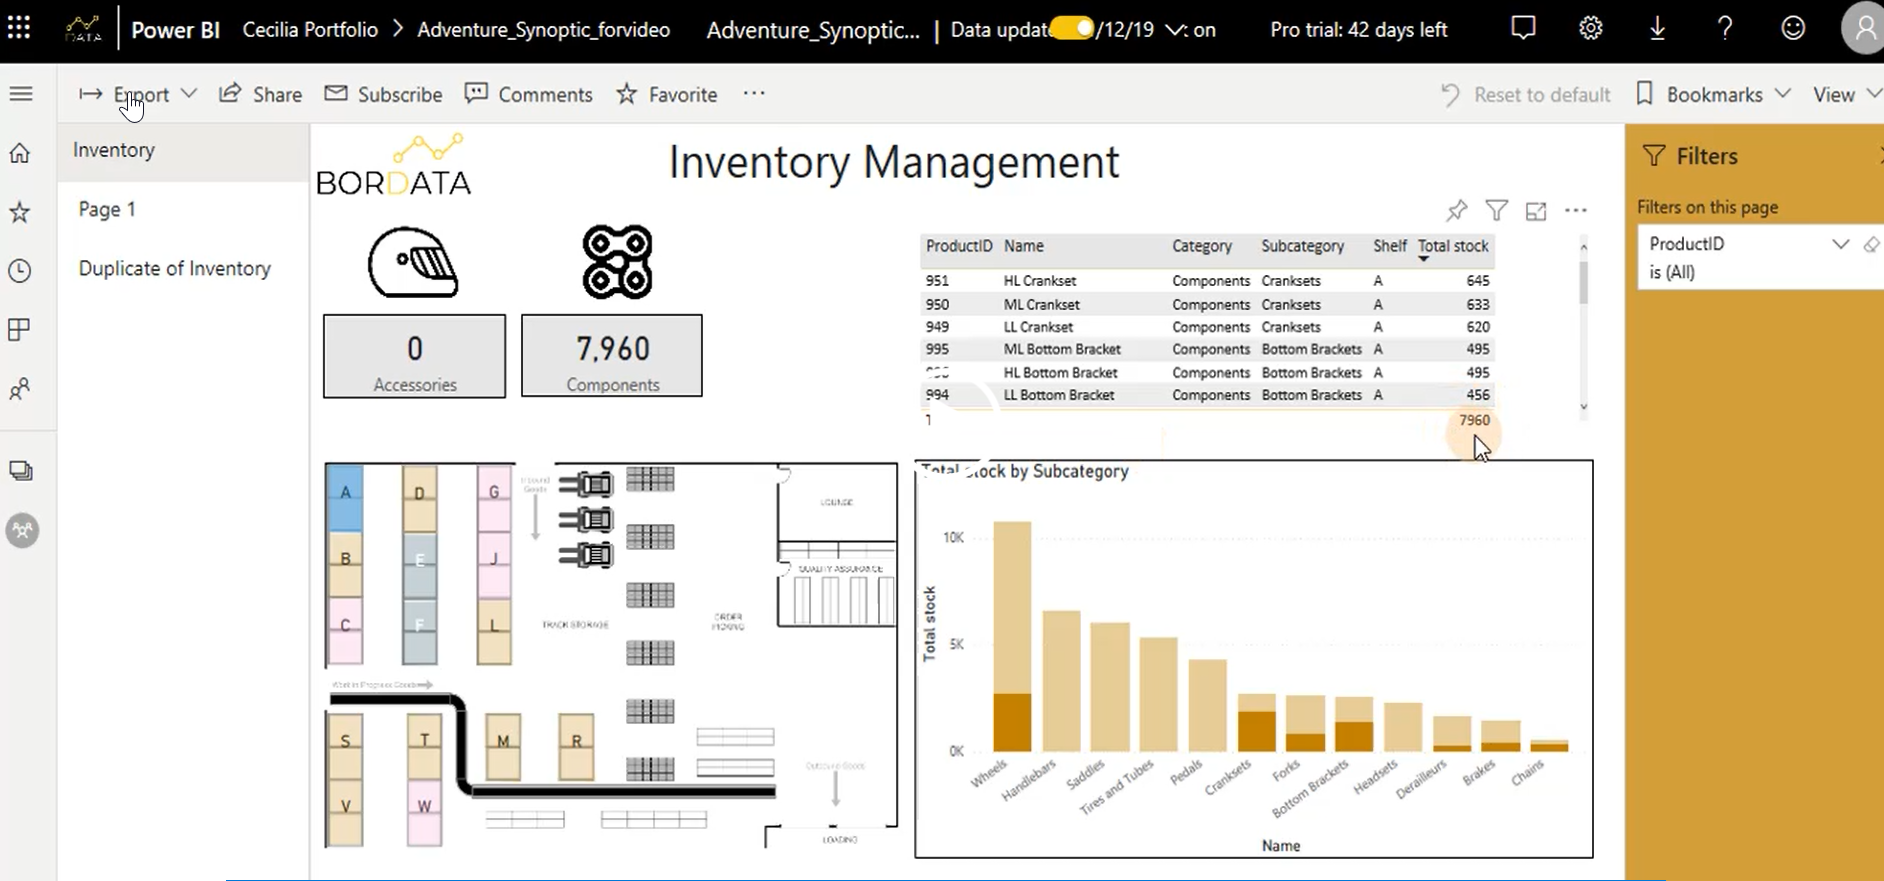 How to import customized maps, floor plans or images to your Power BI